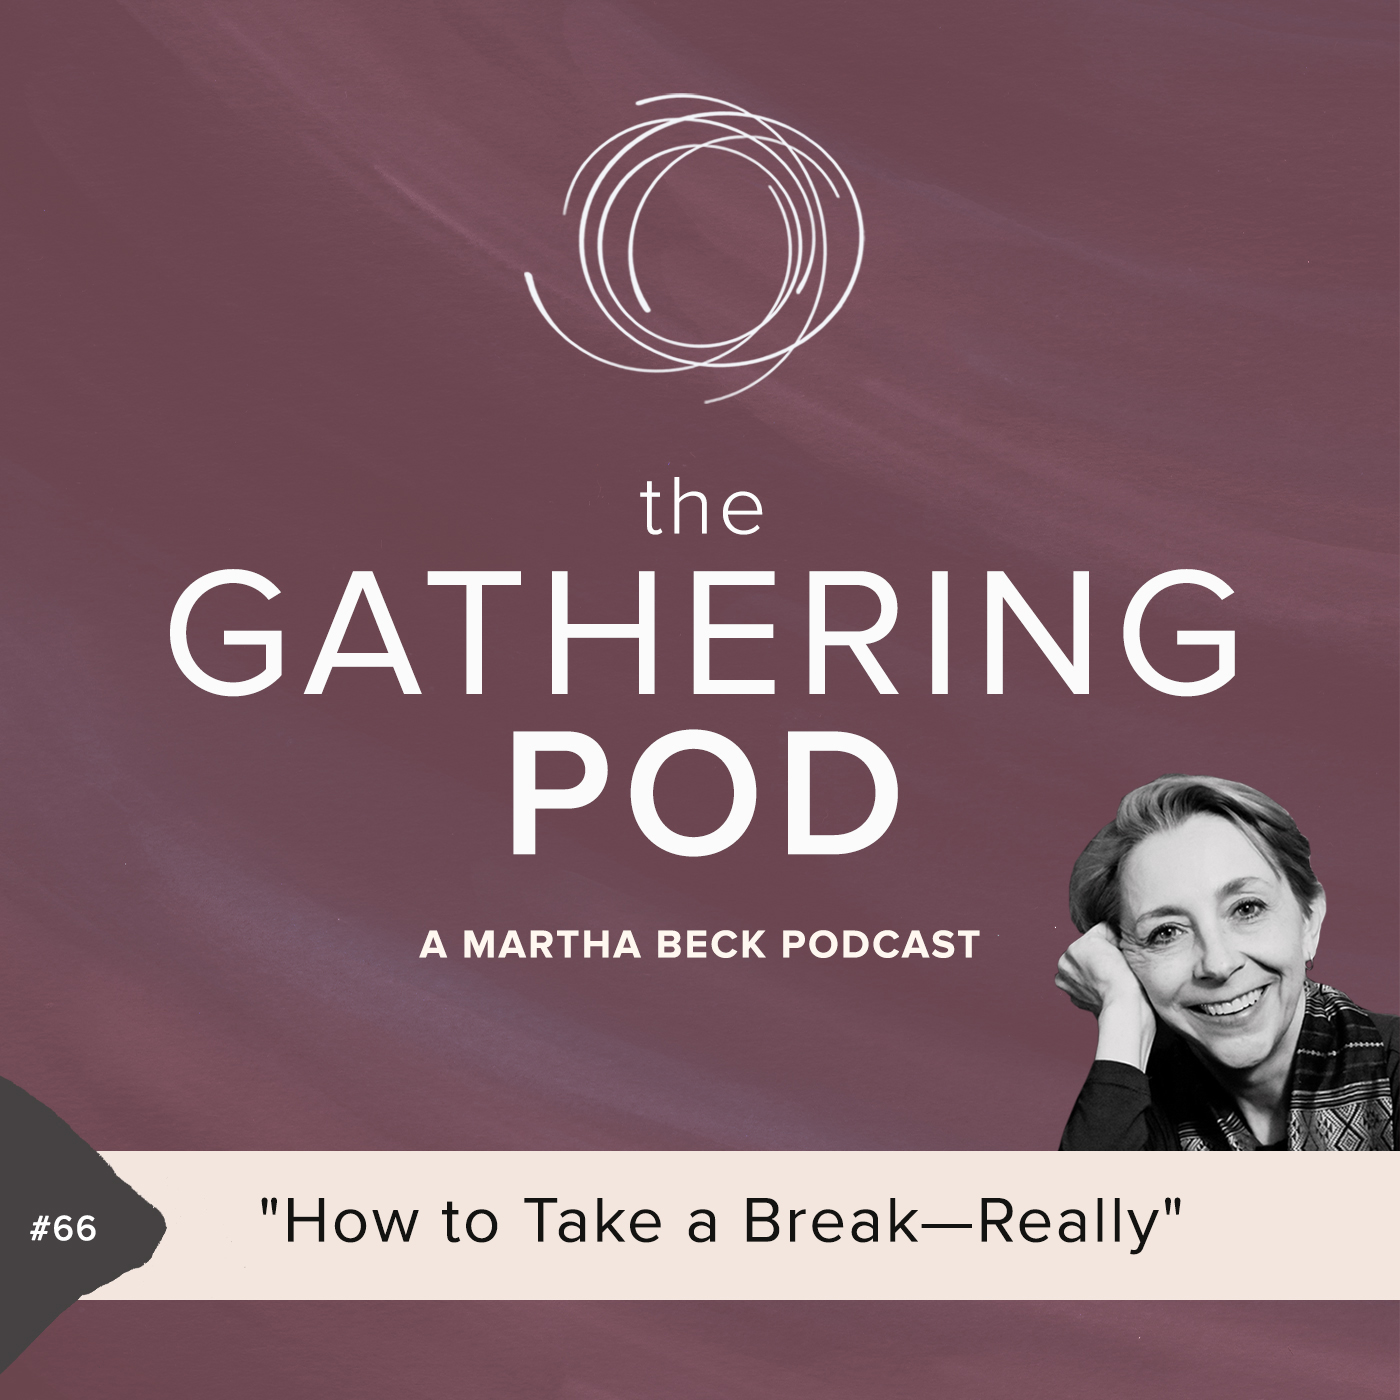 Image for The Gathering Pod A Martha Beck Podcast Episode #66 How to Take a Break—Really